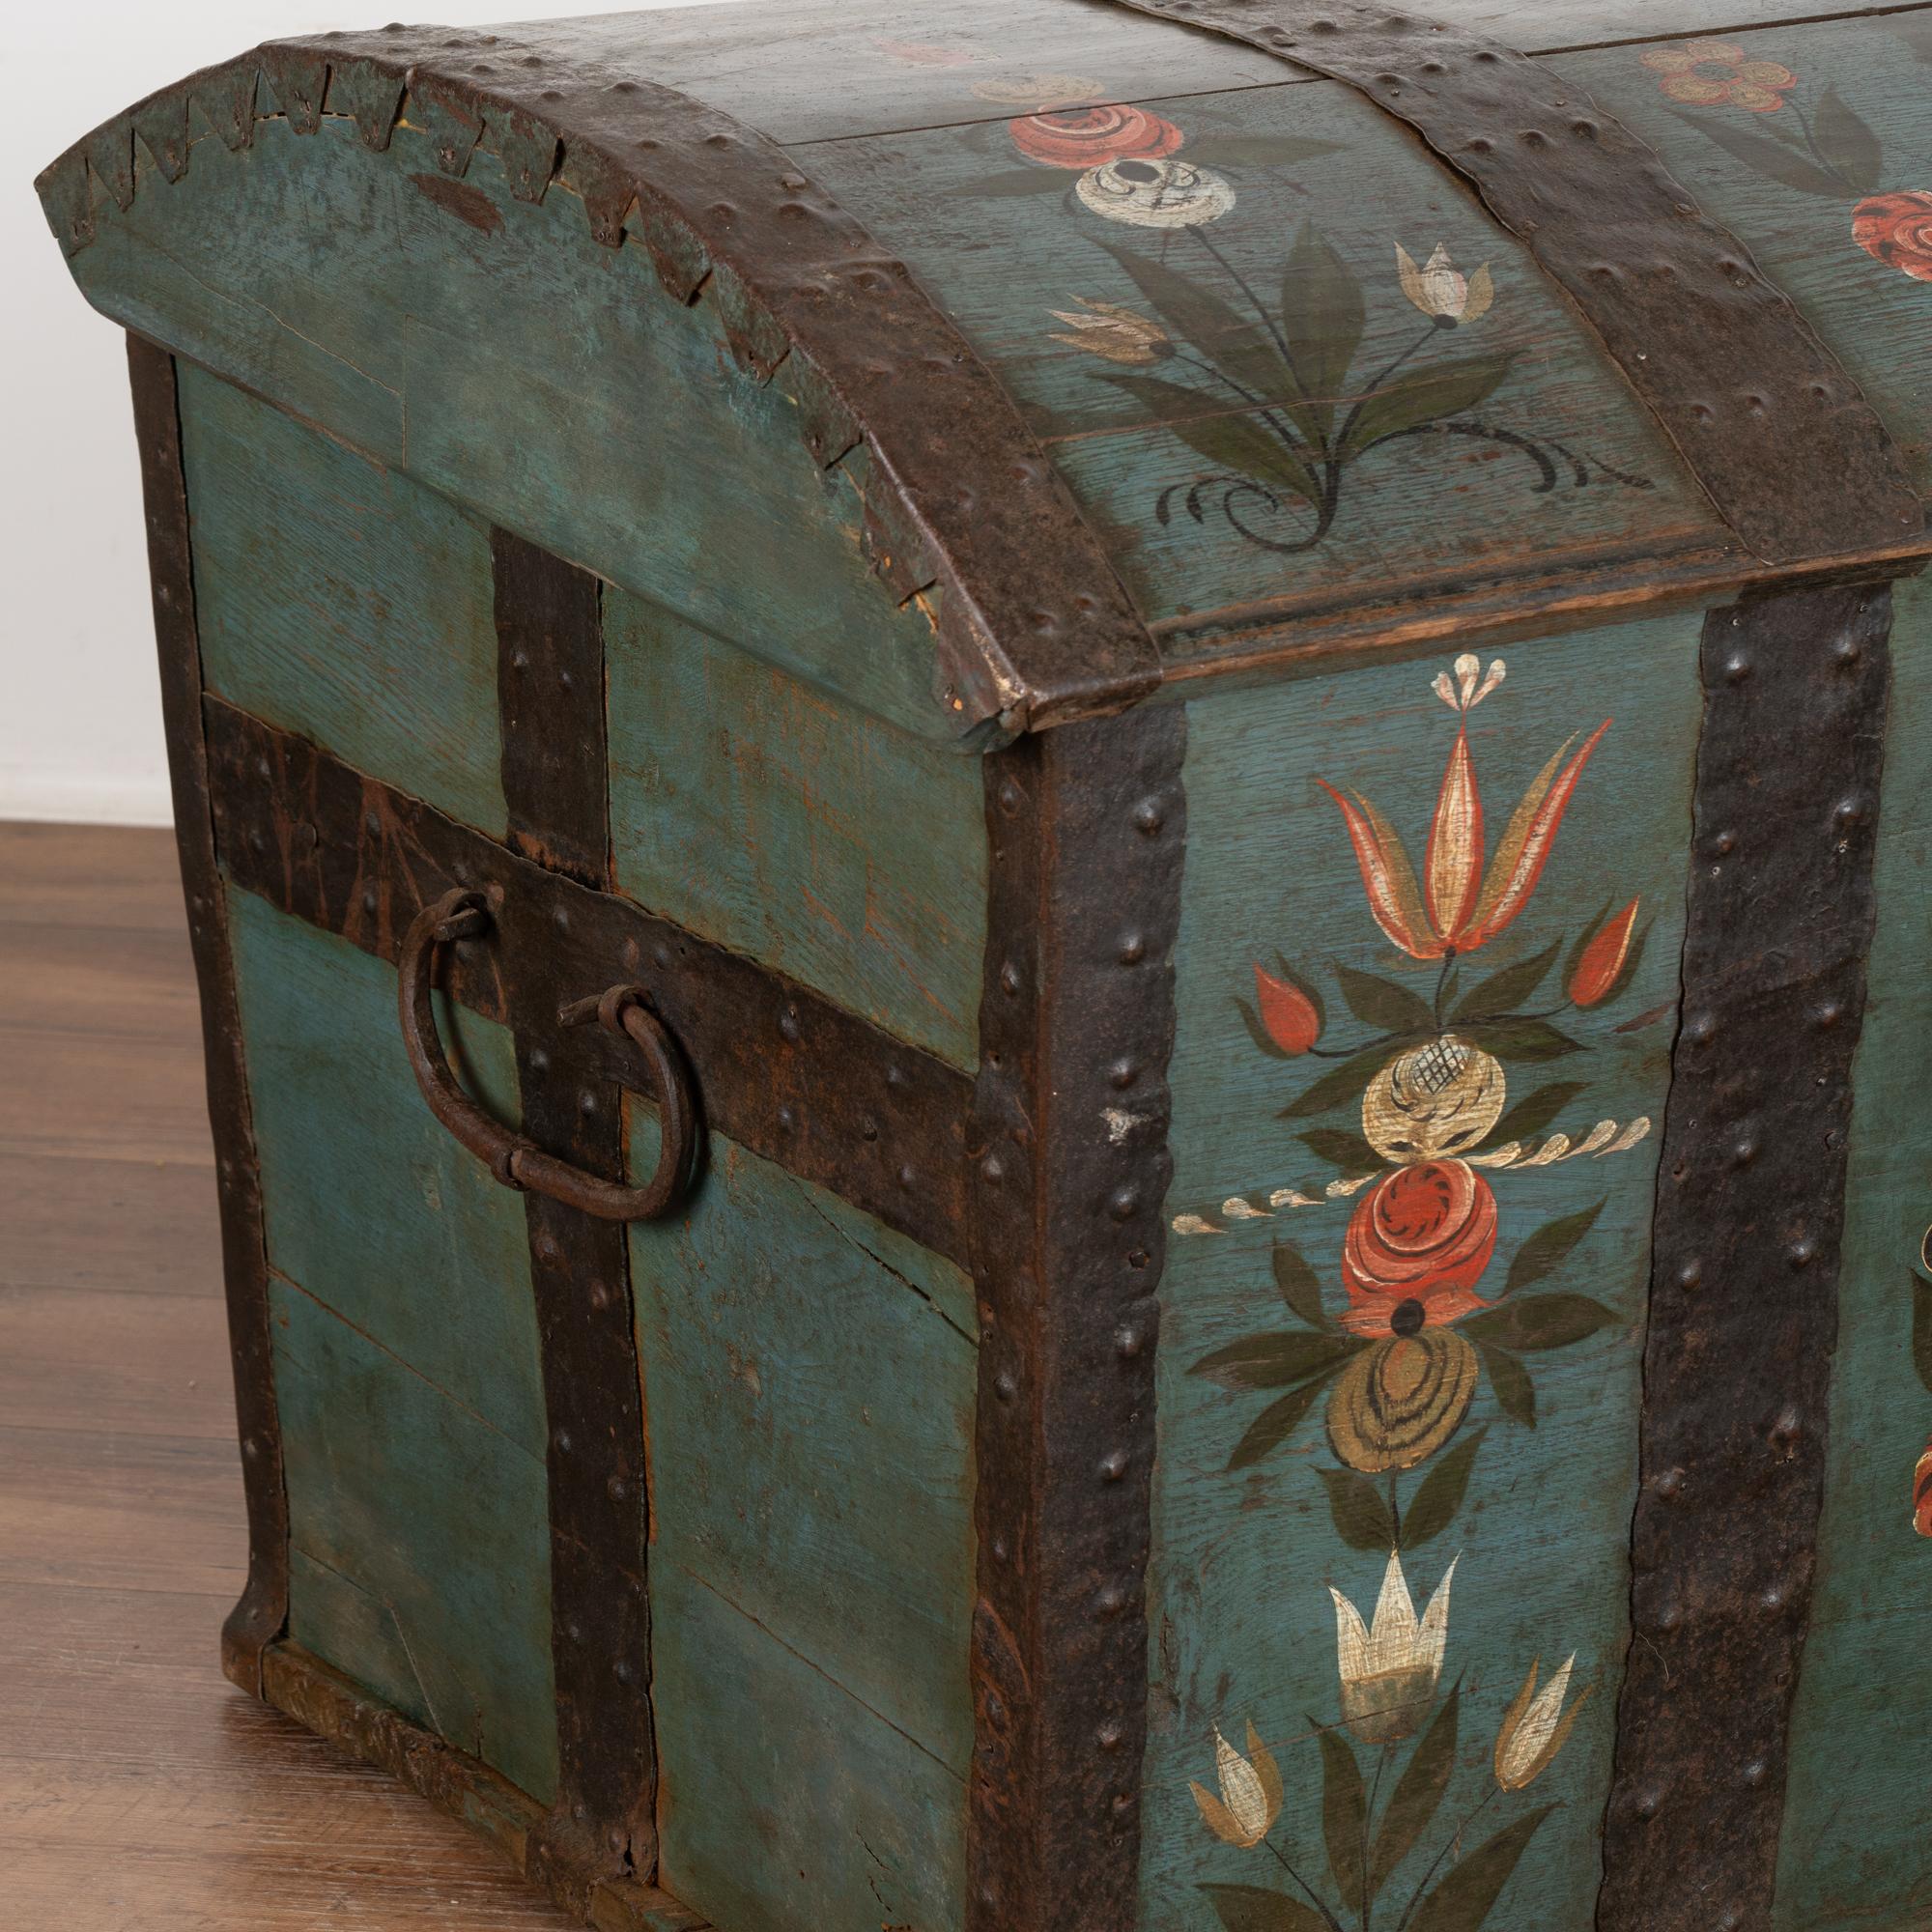 Original Hand Painted Dome Top Blue Trunk With Flowers, Sweden dated 1828 For Sale 2